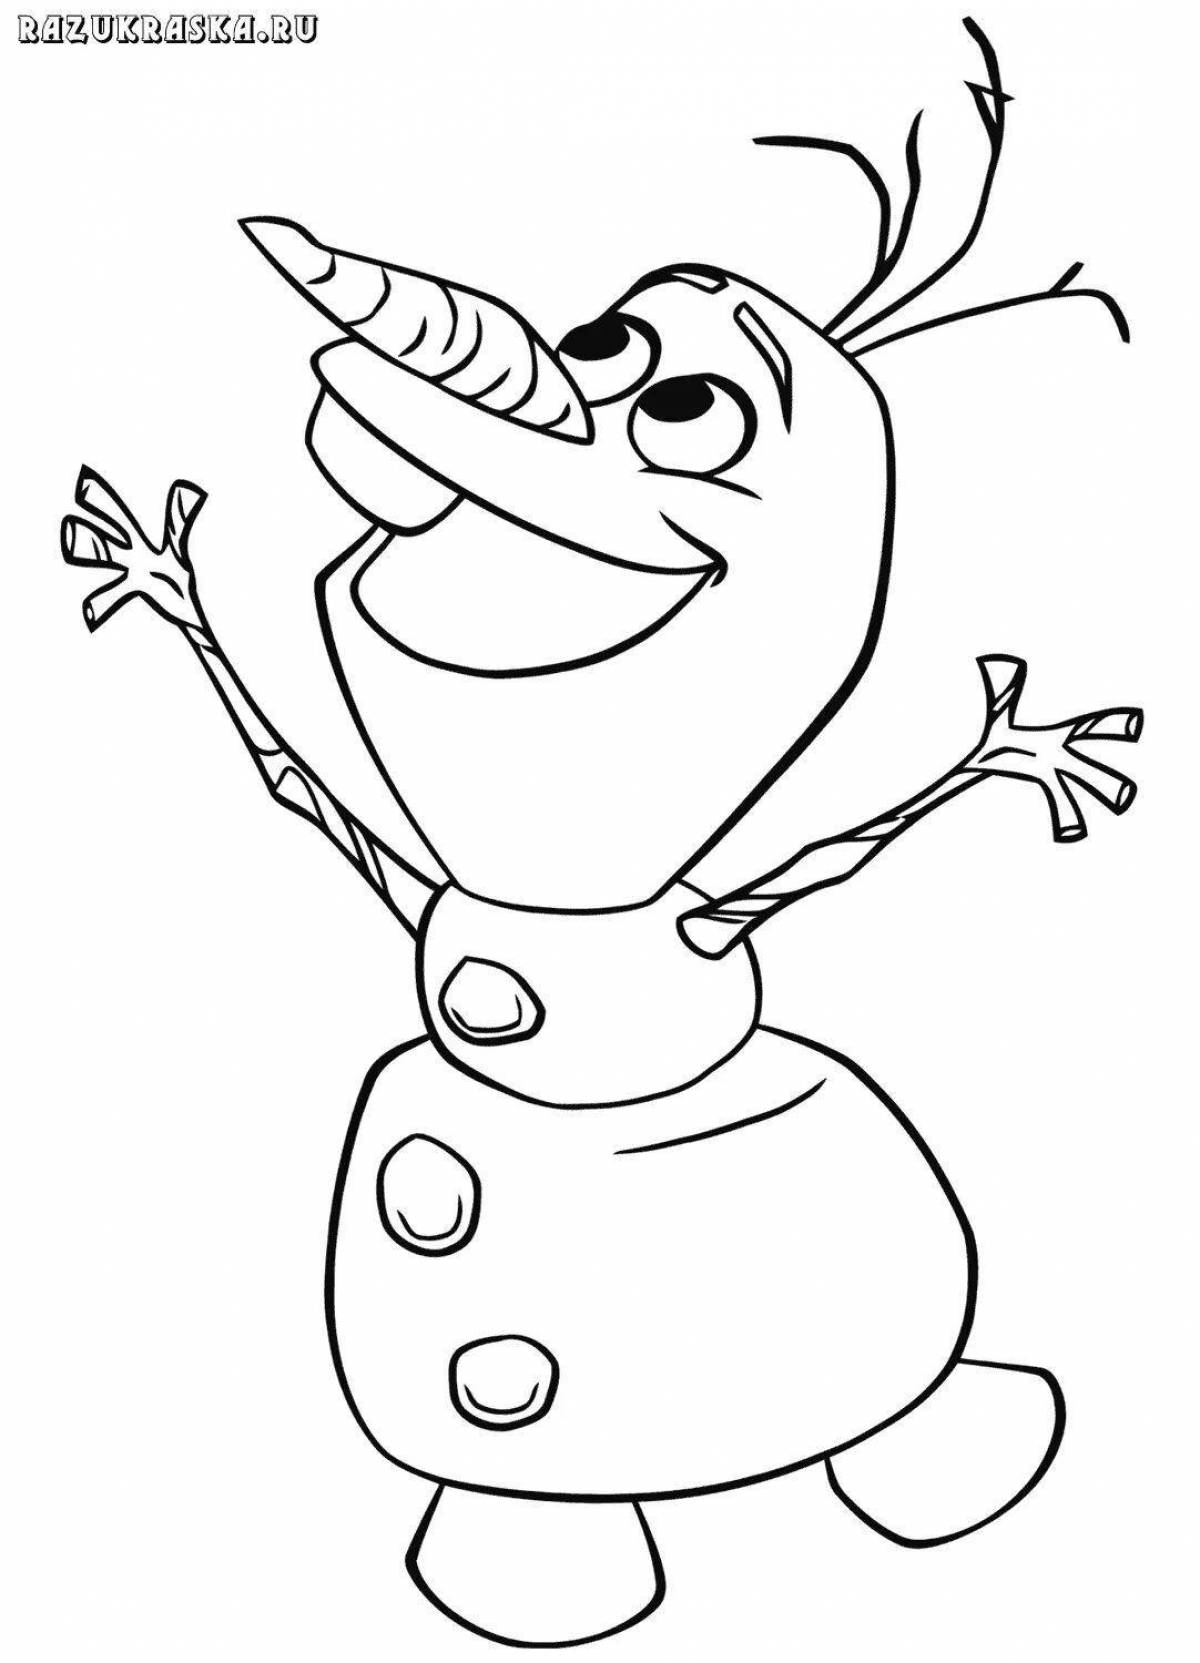 Olaf's gorgeous snowman coloring book